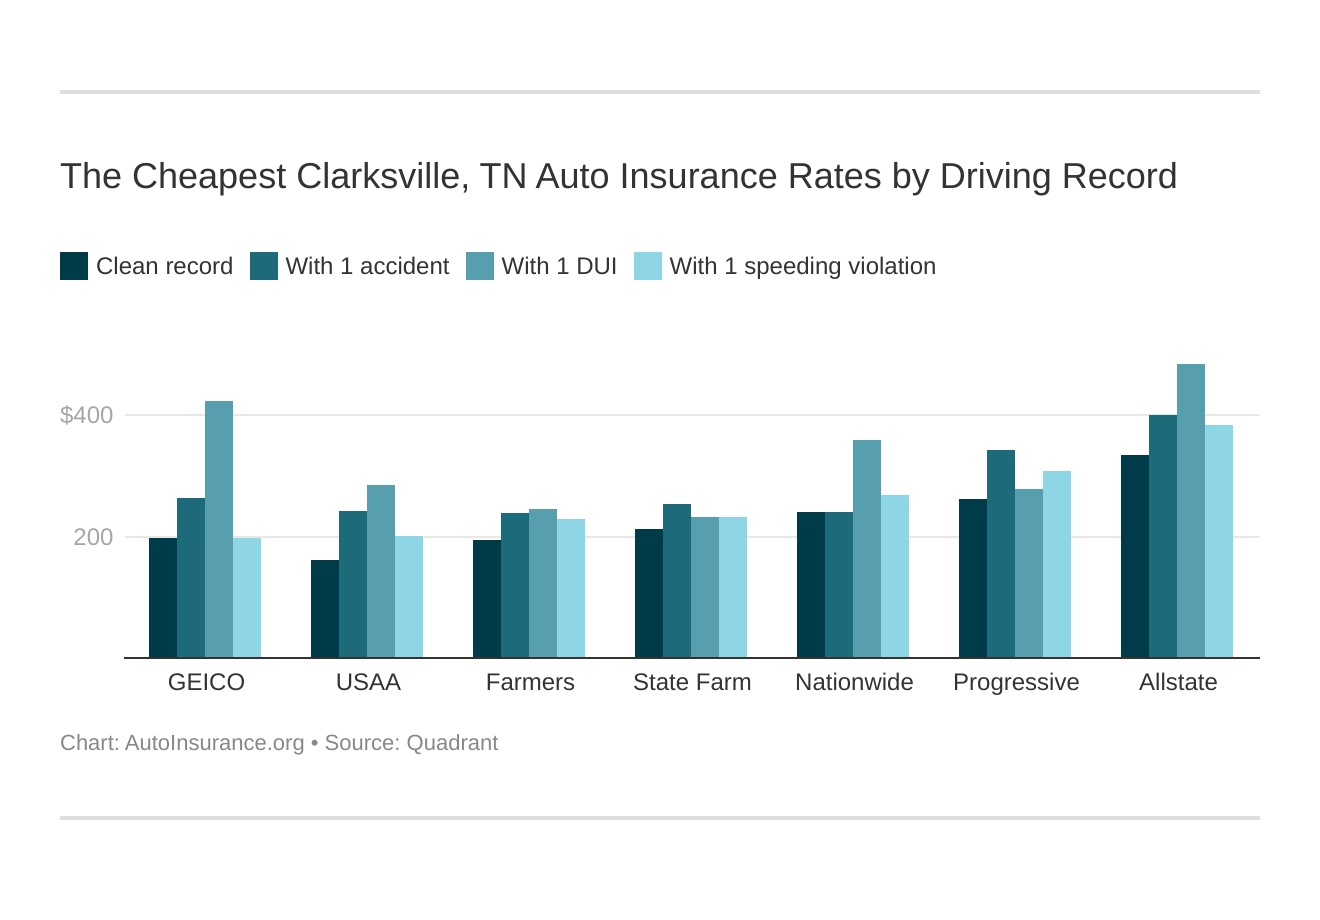 The Cheapest Clarksville, TN Auto Insurance Rates by Driving Record